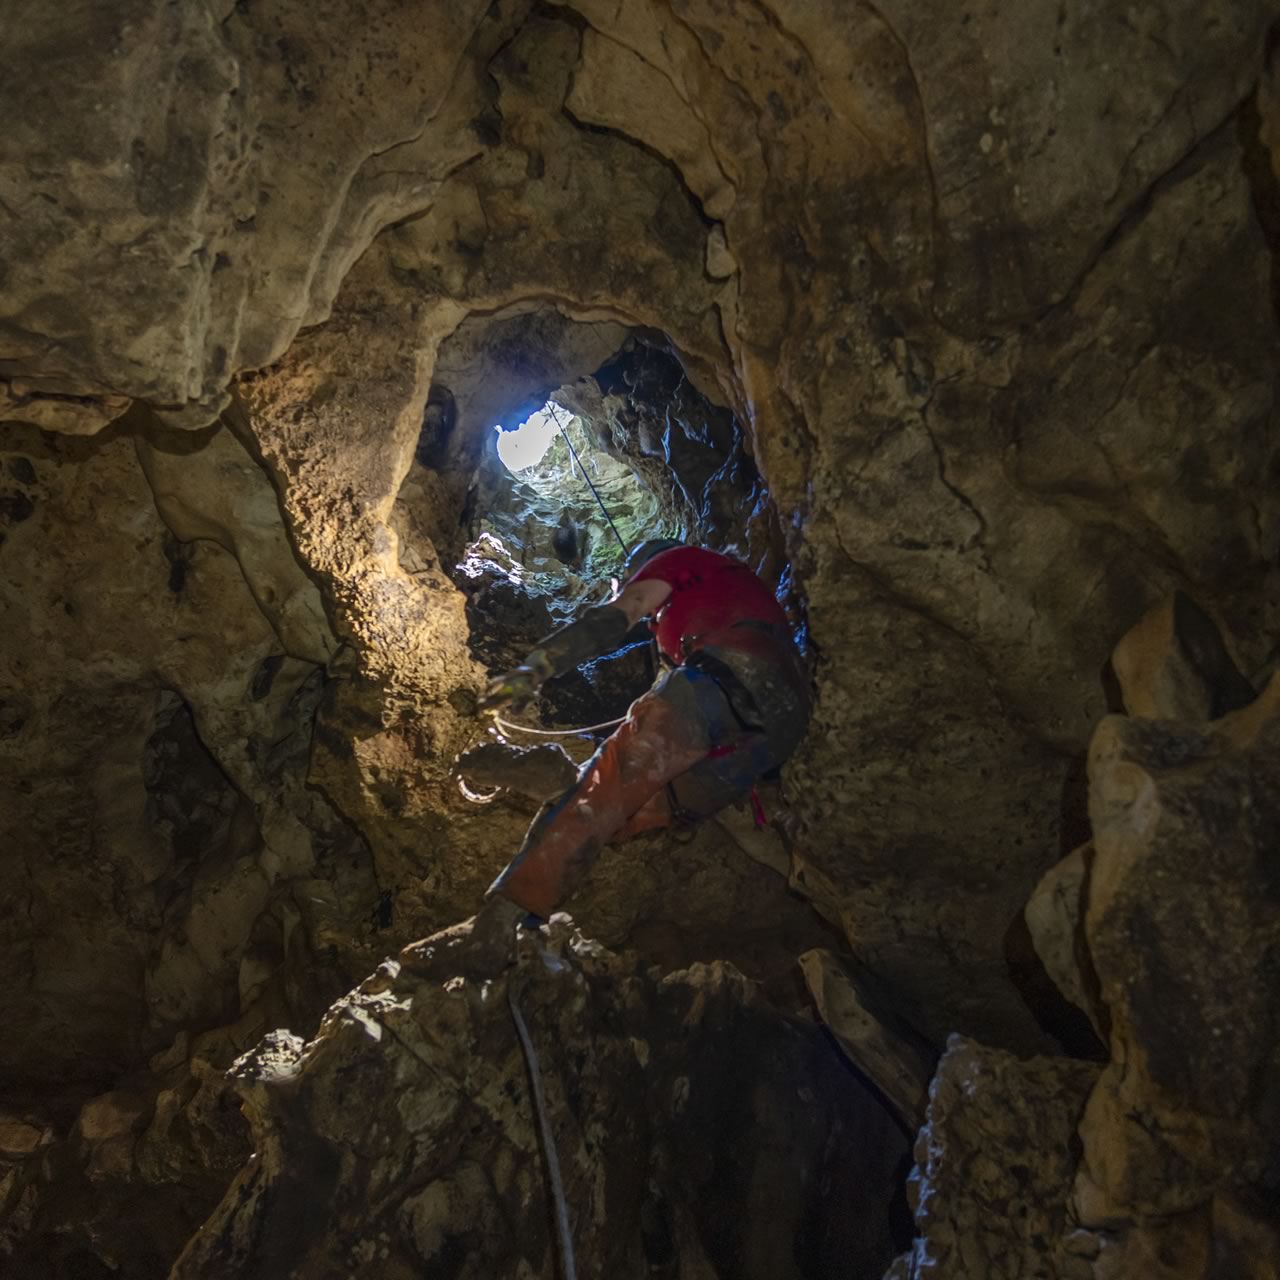 Double Decker Cave, near proposed site of Vulcan quarry in Comal County, Texas. Photo courtesy David Ochel.